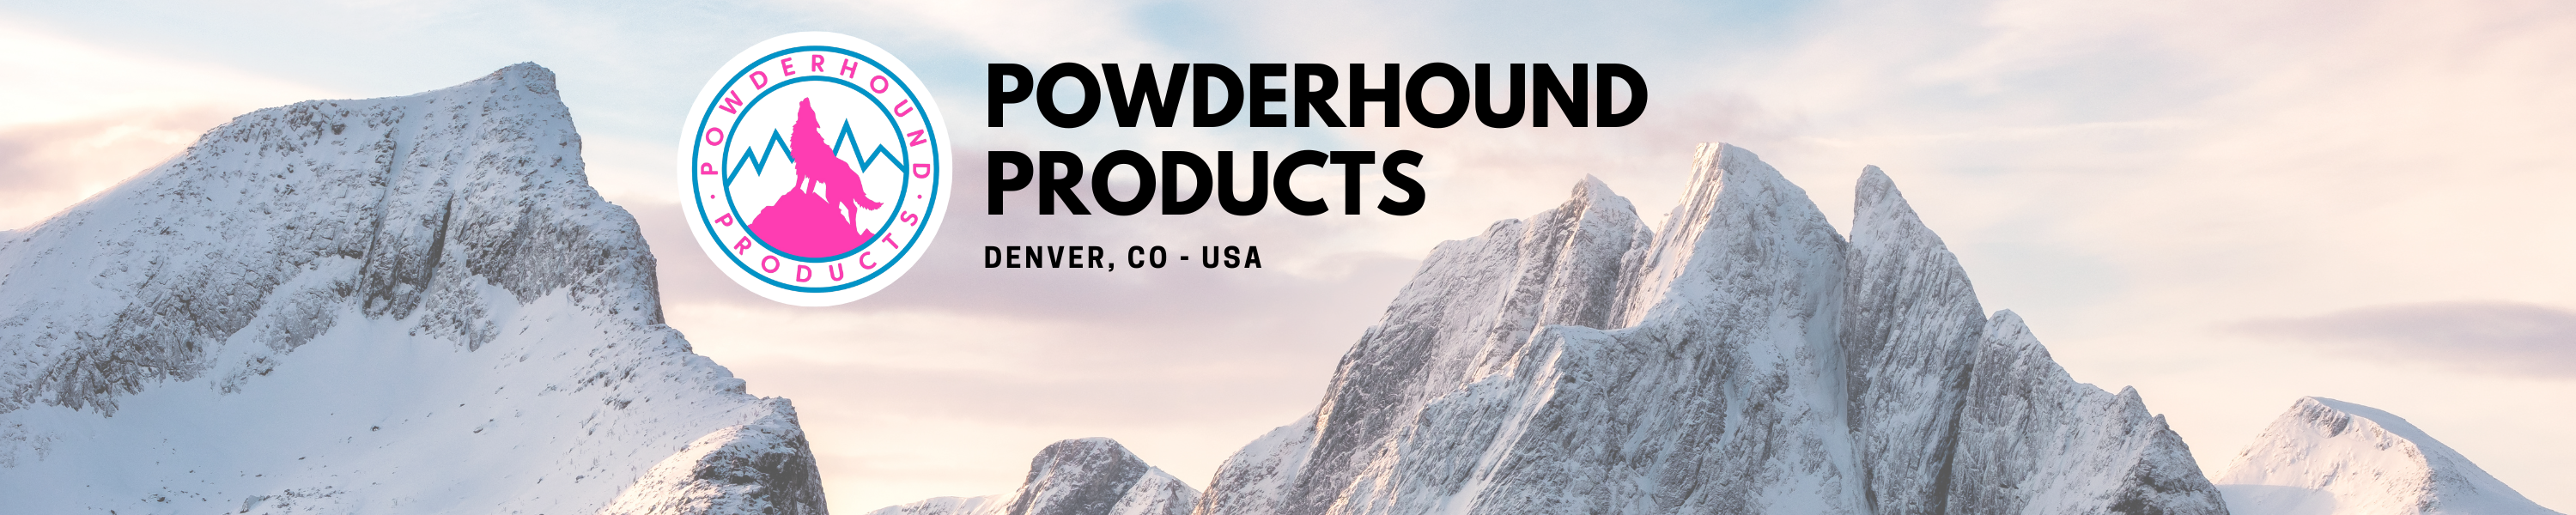 Powderhound, Powder, Hound, Powdrhounds, Product, Products, Denver, CO, Colorado, USA, Forest, Woods, Outdoors, Hiking, Biking, Camping, Trees, Pines, Conifer, Hike, Bike, Camp, Trail, Mountain, park